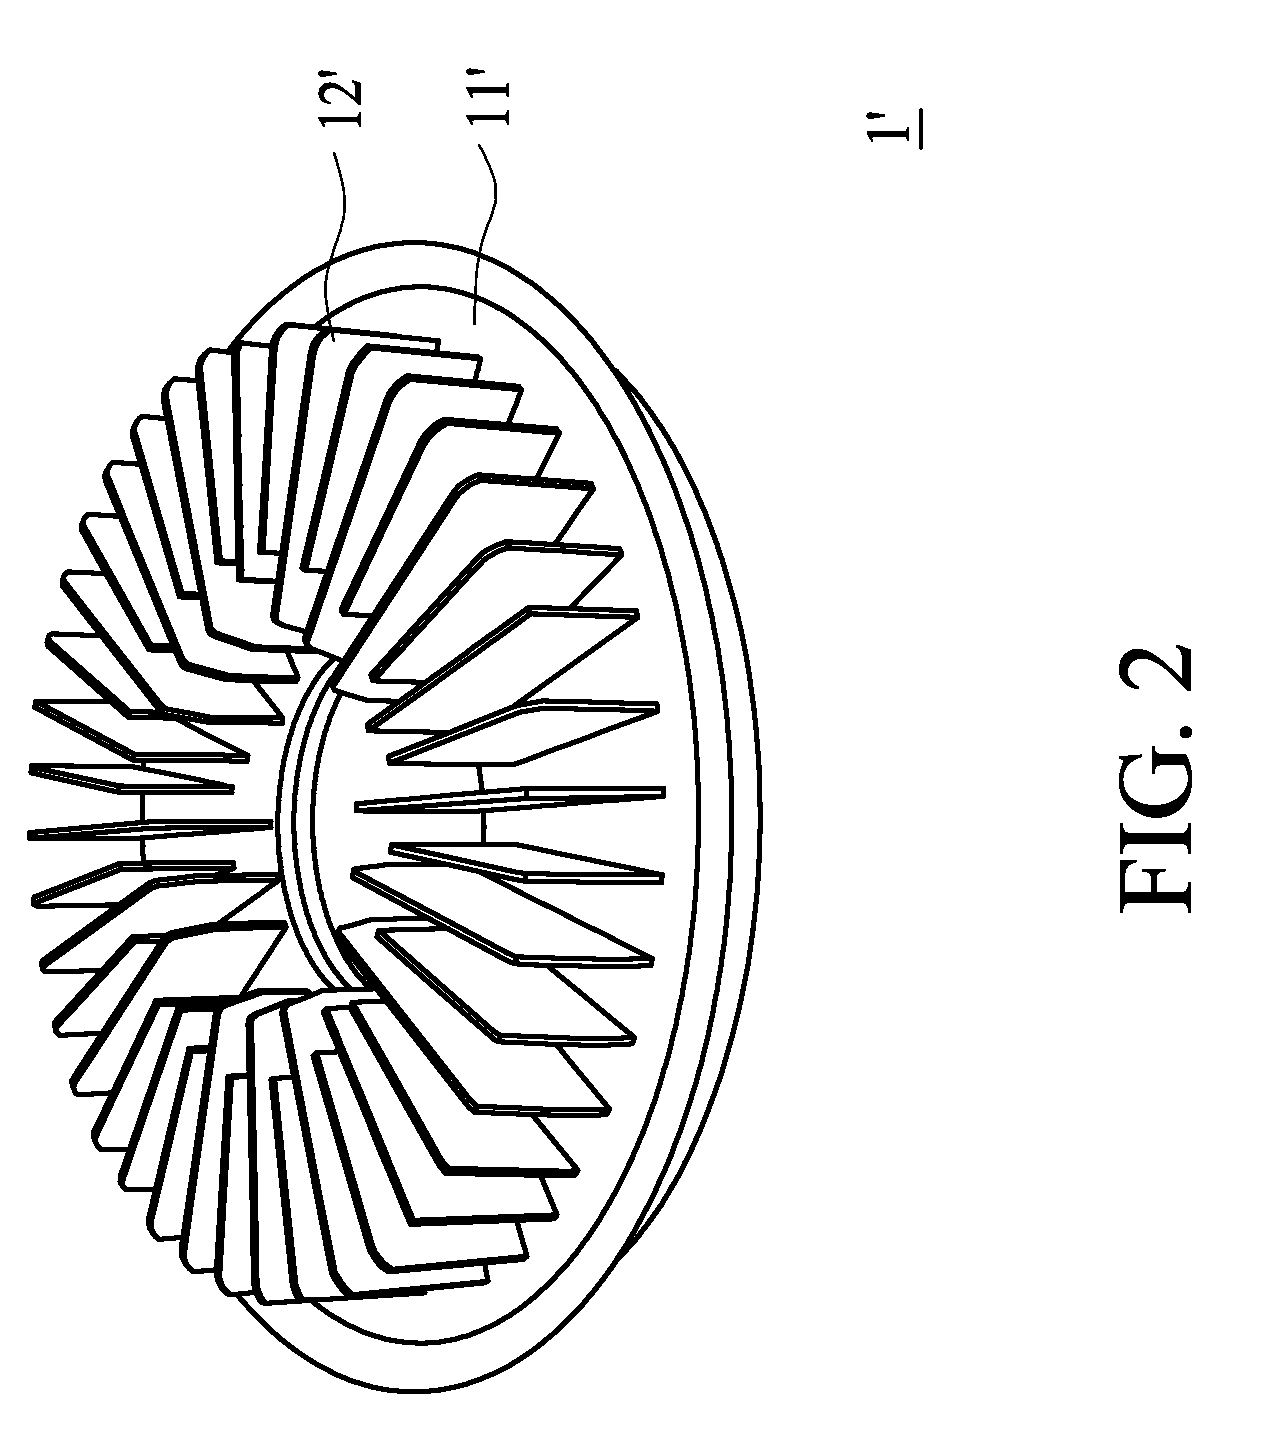 Passive heat sink and light emitting diode lighting device using the same